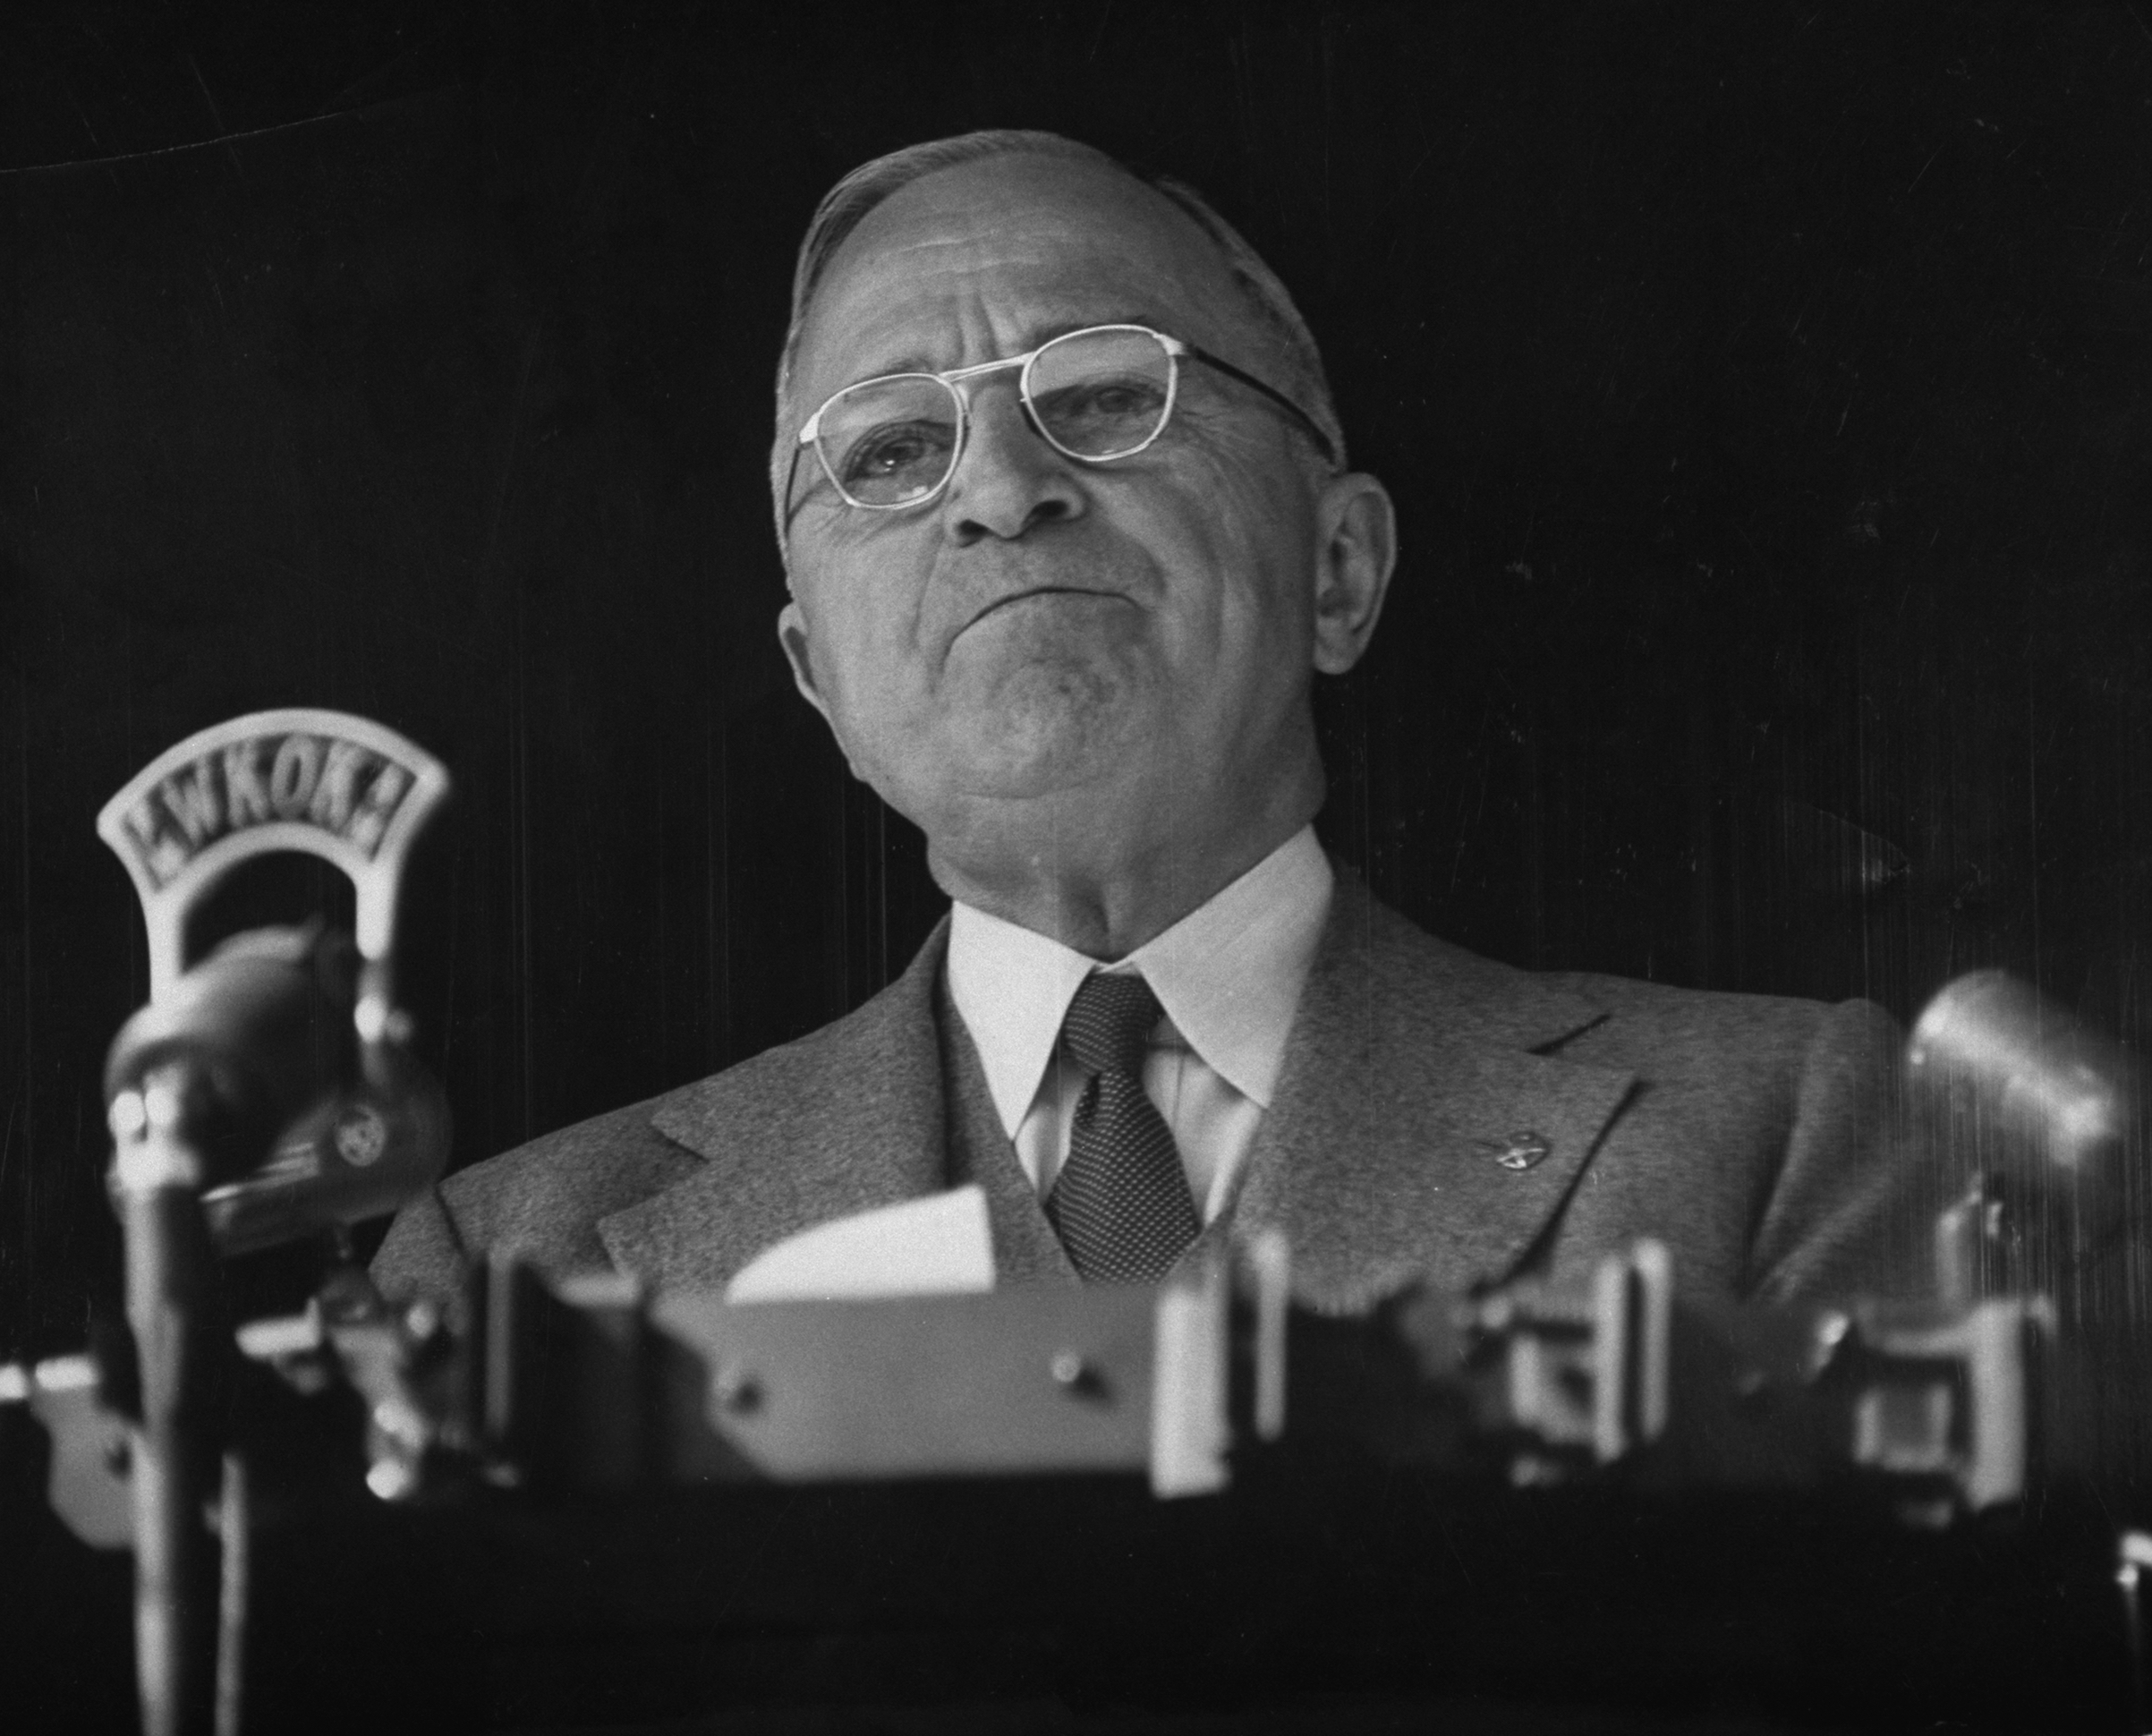 Harry S. Truman making a campaign speech in 1952 (Yale Joel—The LIFE Picture Collection via Getty Images)